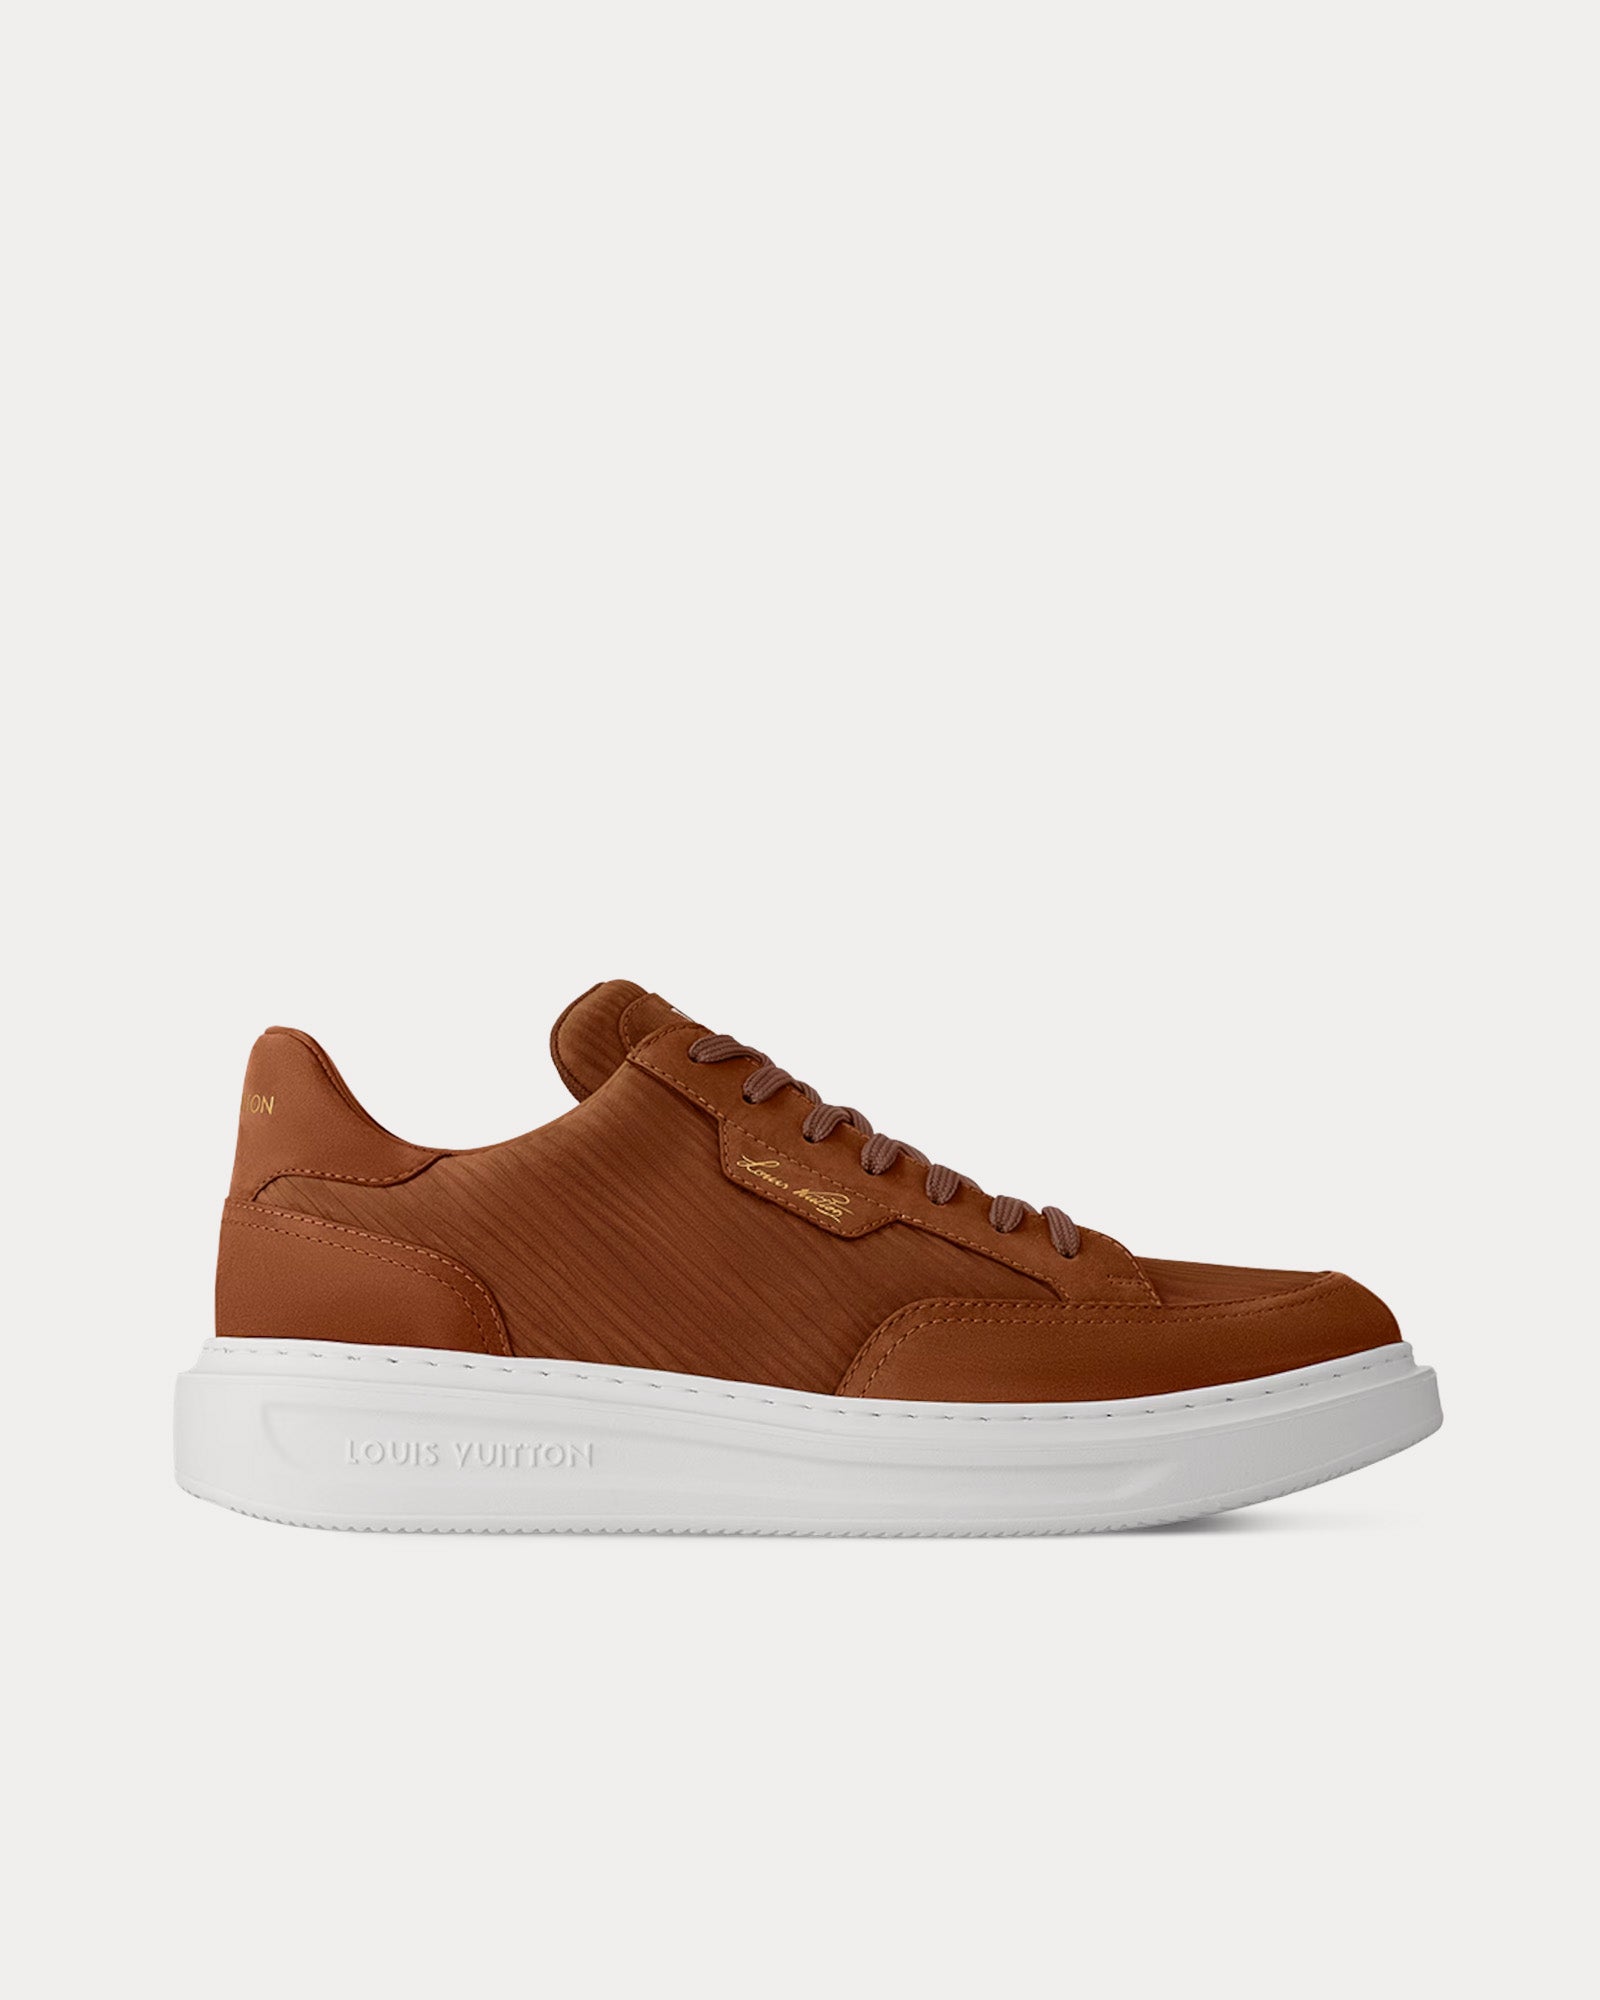 Beverly Hills leather low trainers